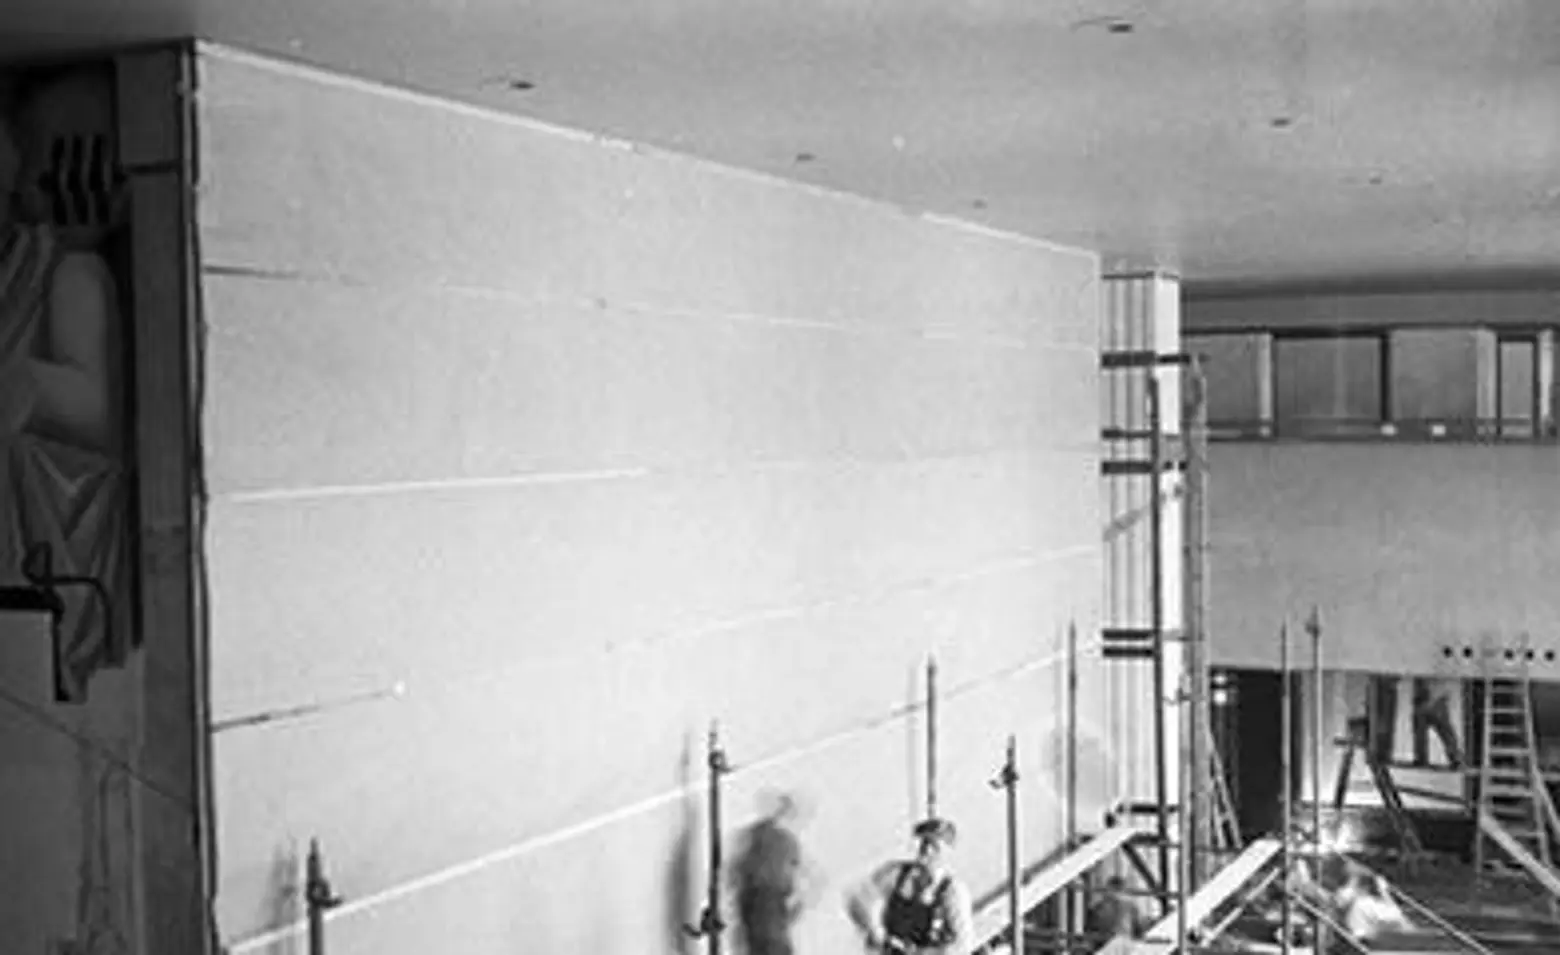 Rivera Diego's mural covered by workmen at Rockefeller Center 1934. Photo by Lucienne Bloch, Diego's assistant at the time